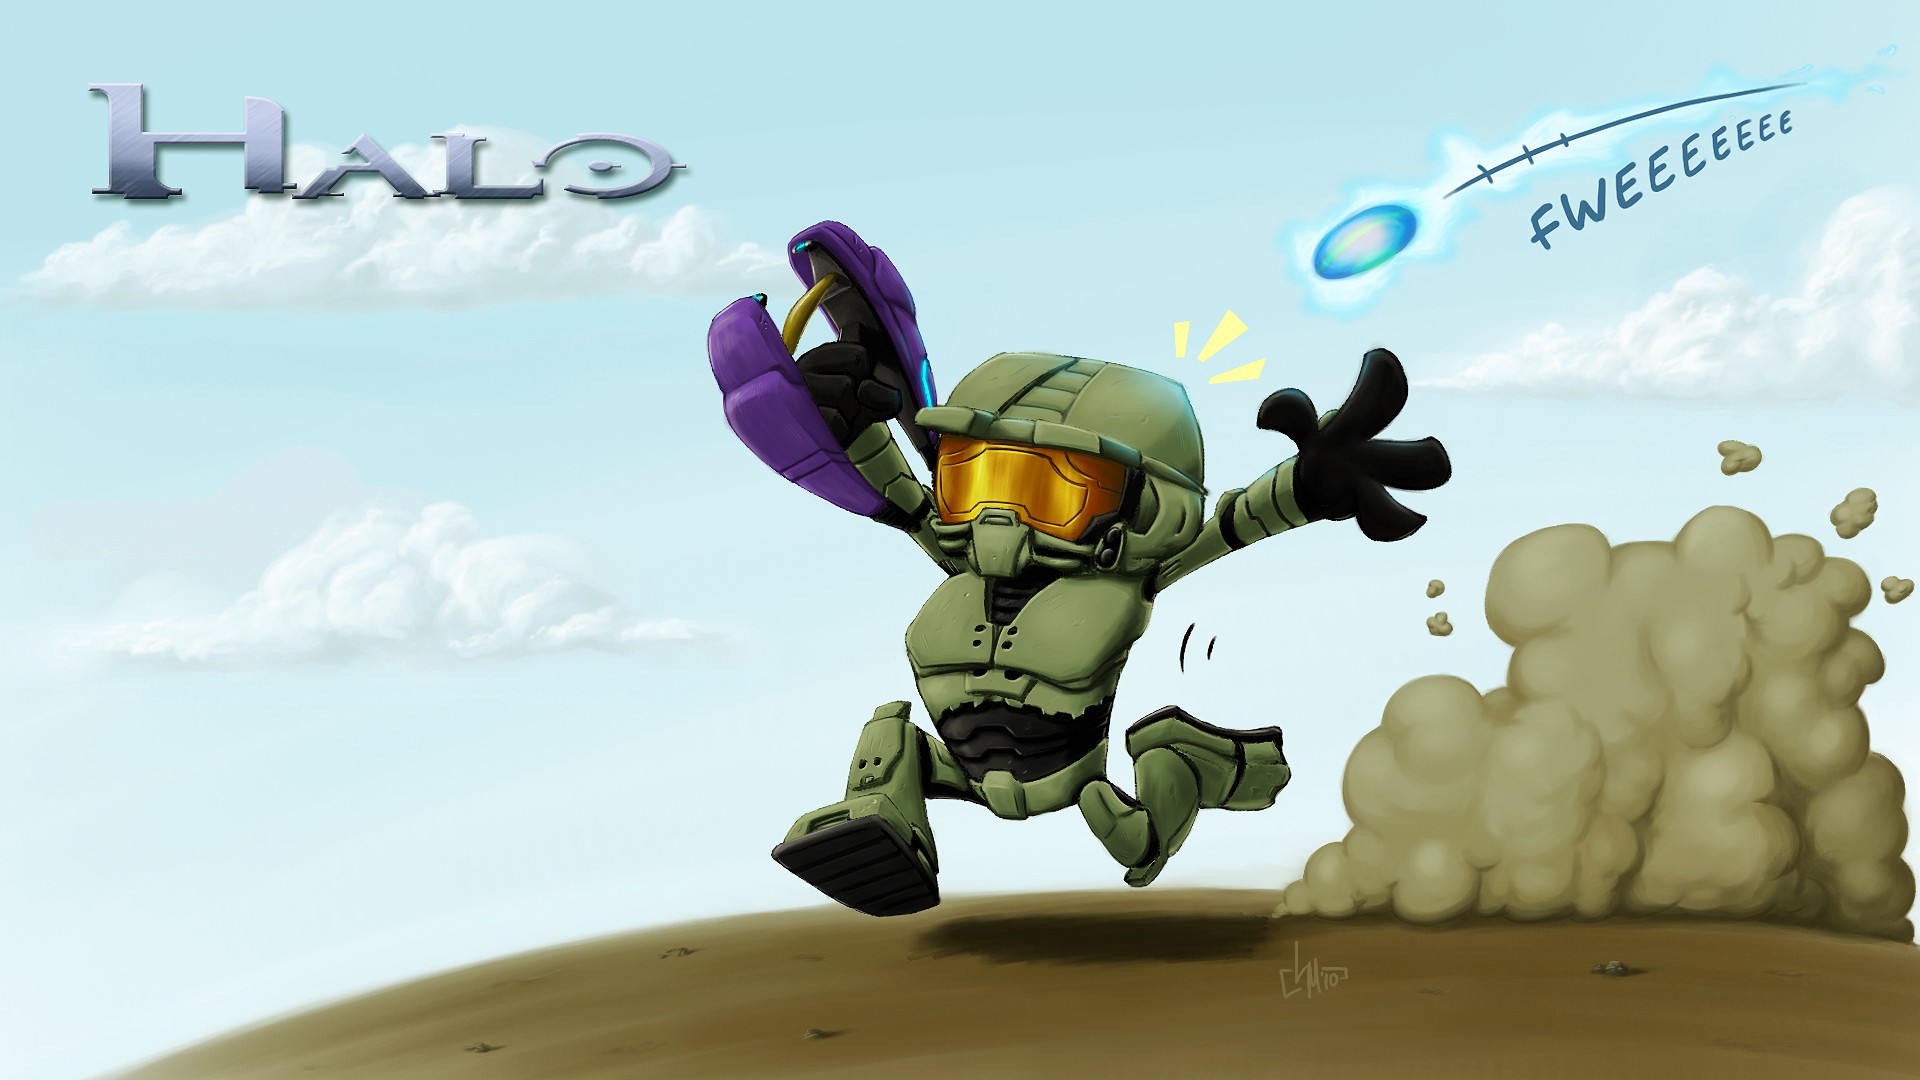 Funny Game Halo 1920x1080